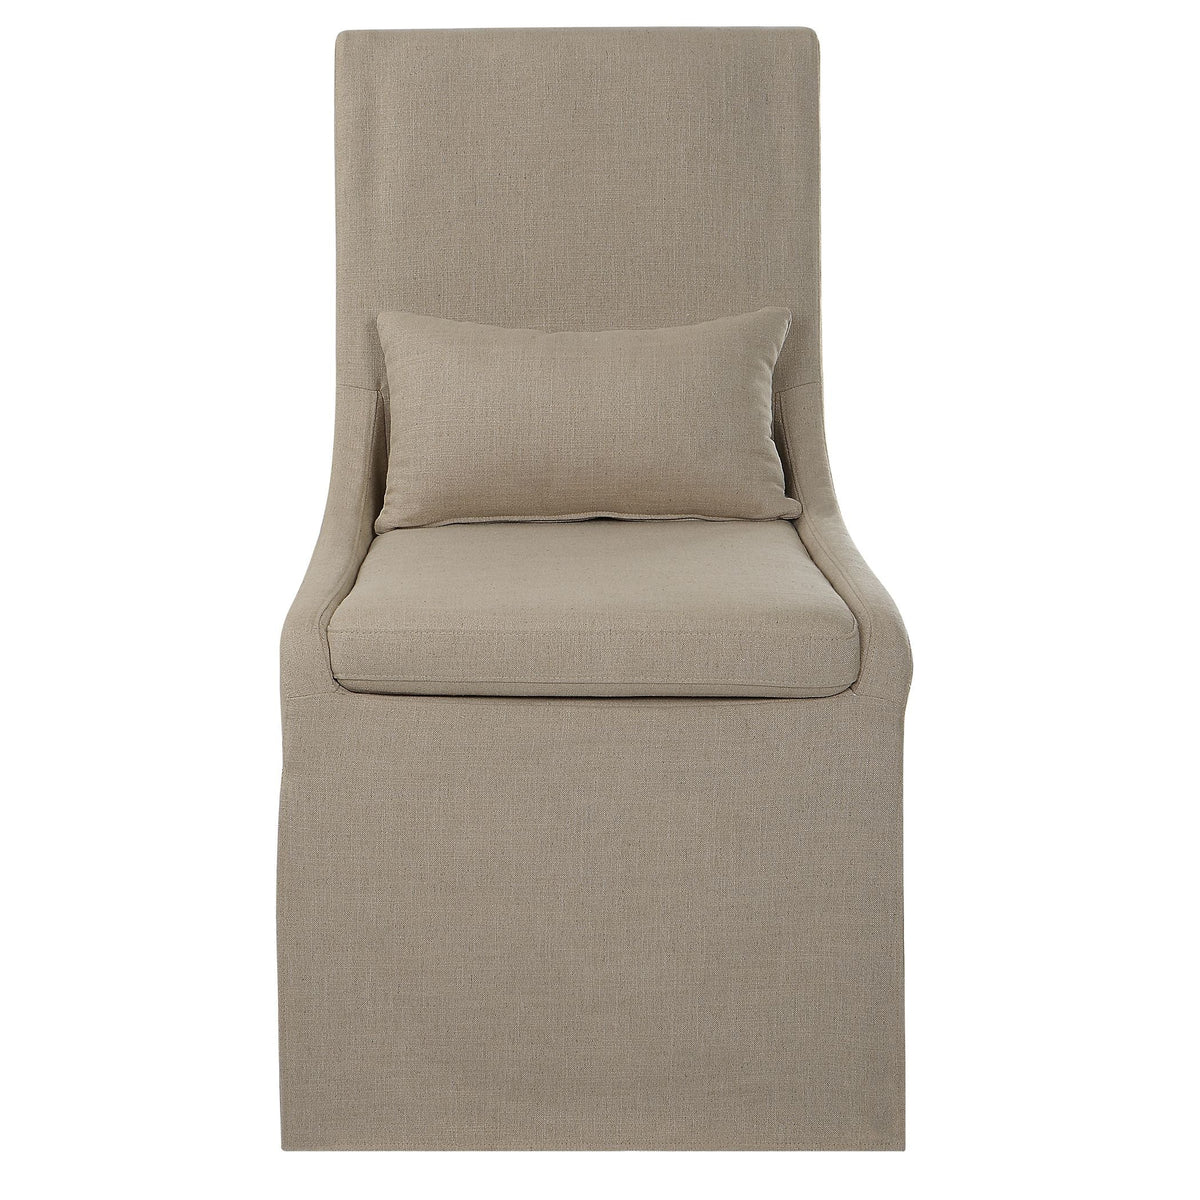 Uttermost Coley Tan Armless Chair